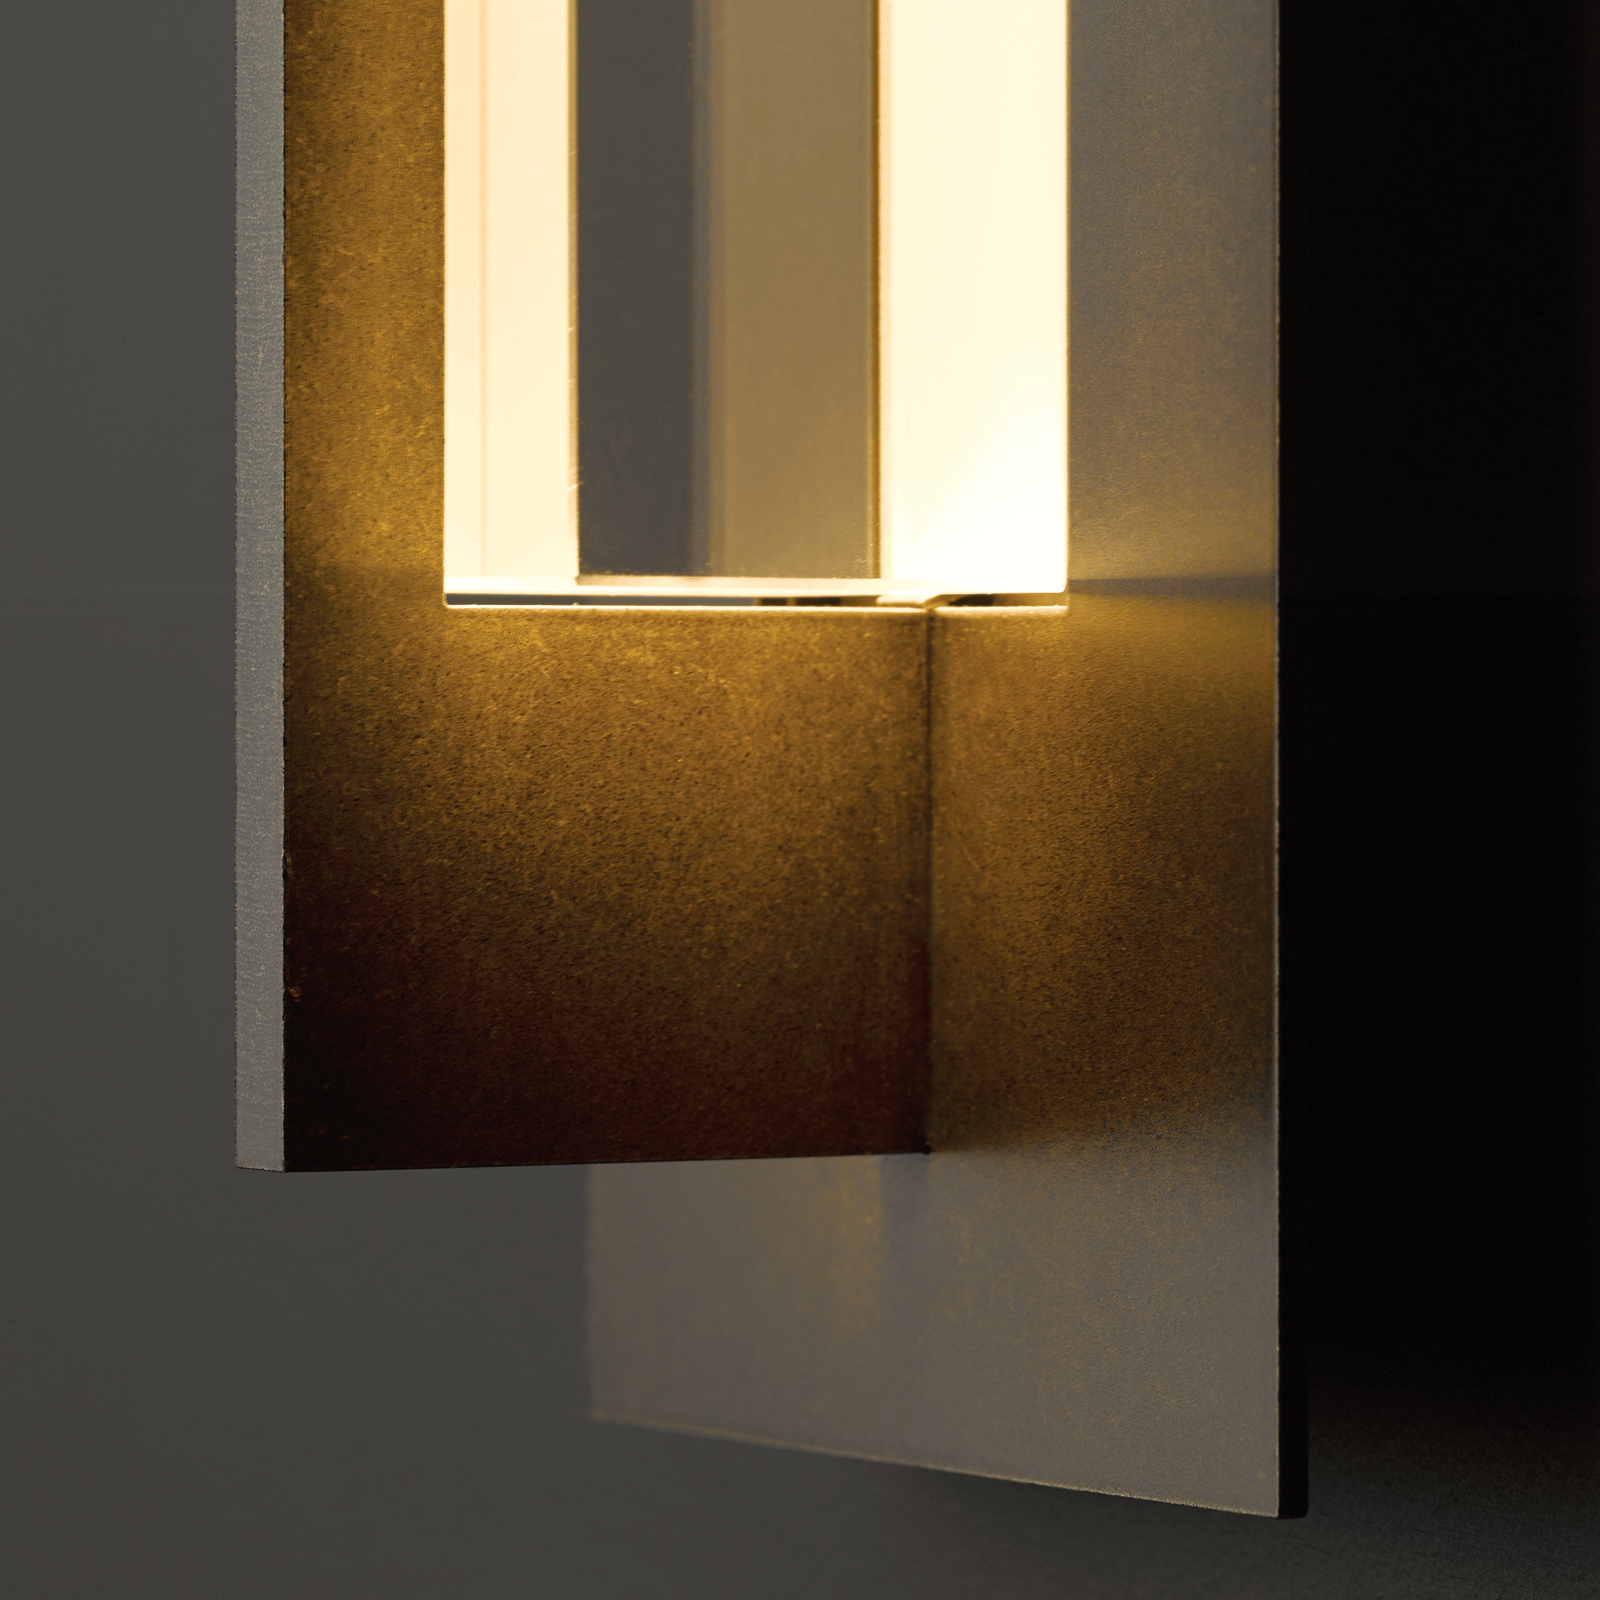 Hubbardton Forge Double Axis Small LED Outdoor Sconce